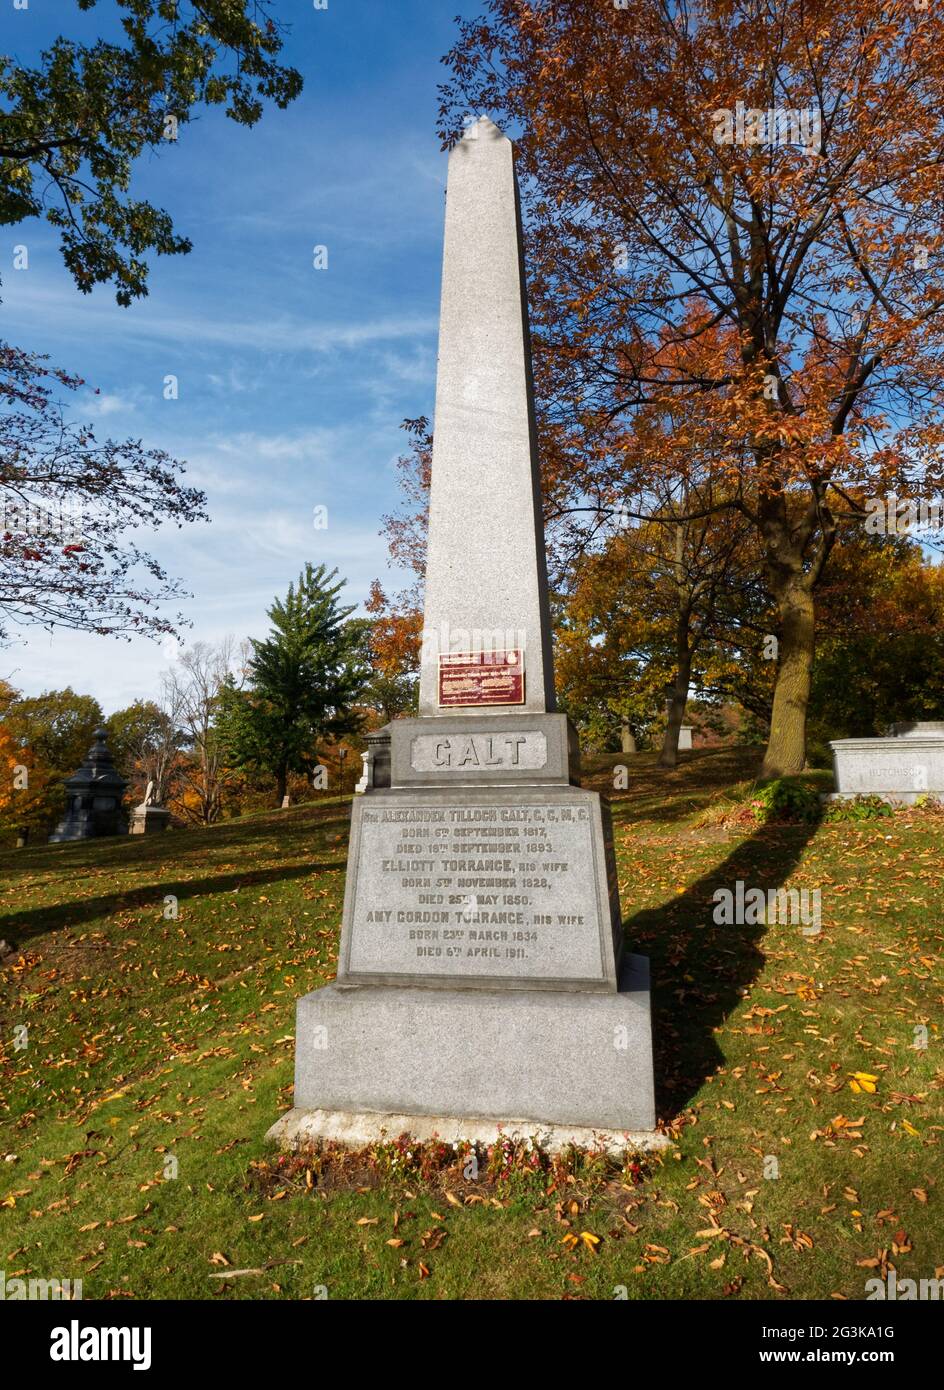 Sir Alexander Galt's, father of Canada's confederations  tombstone in the Mount Royal cemetery in Montreal, Canada. Stock Photo